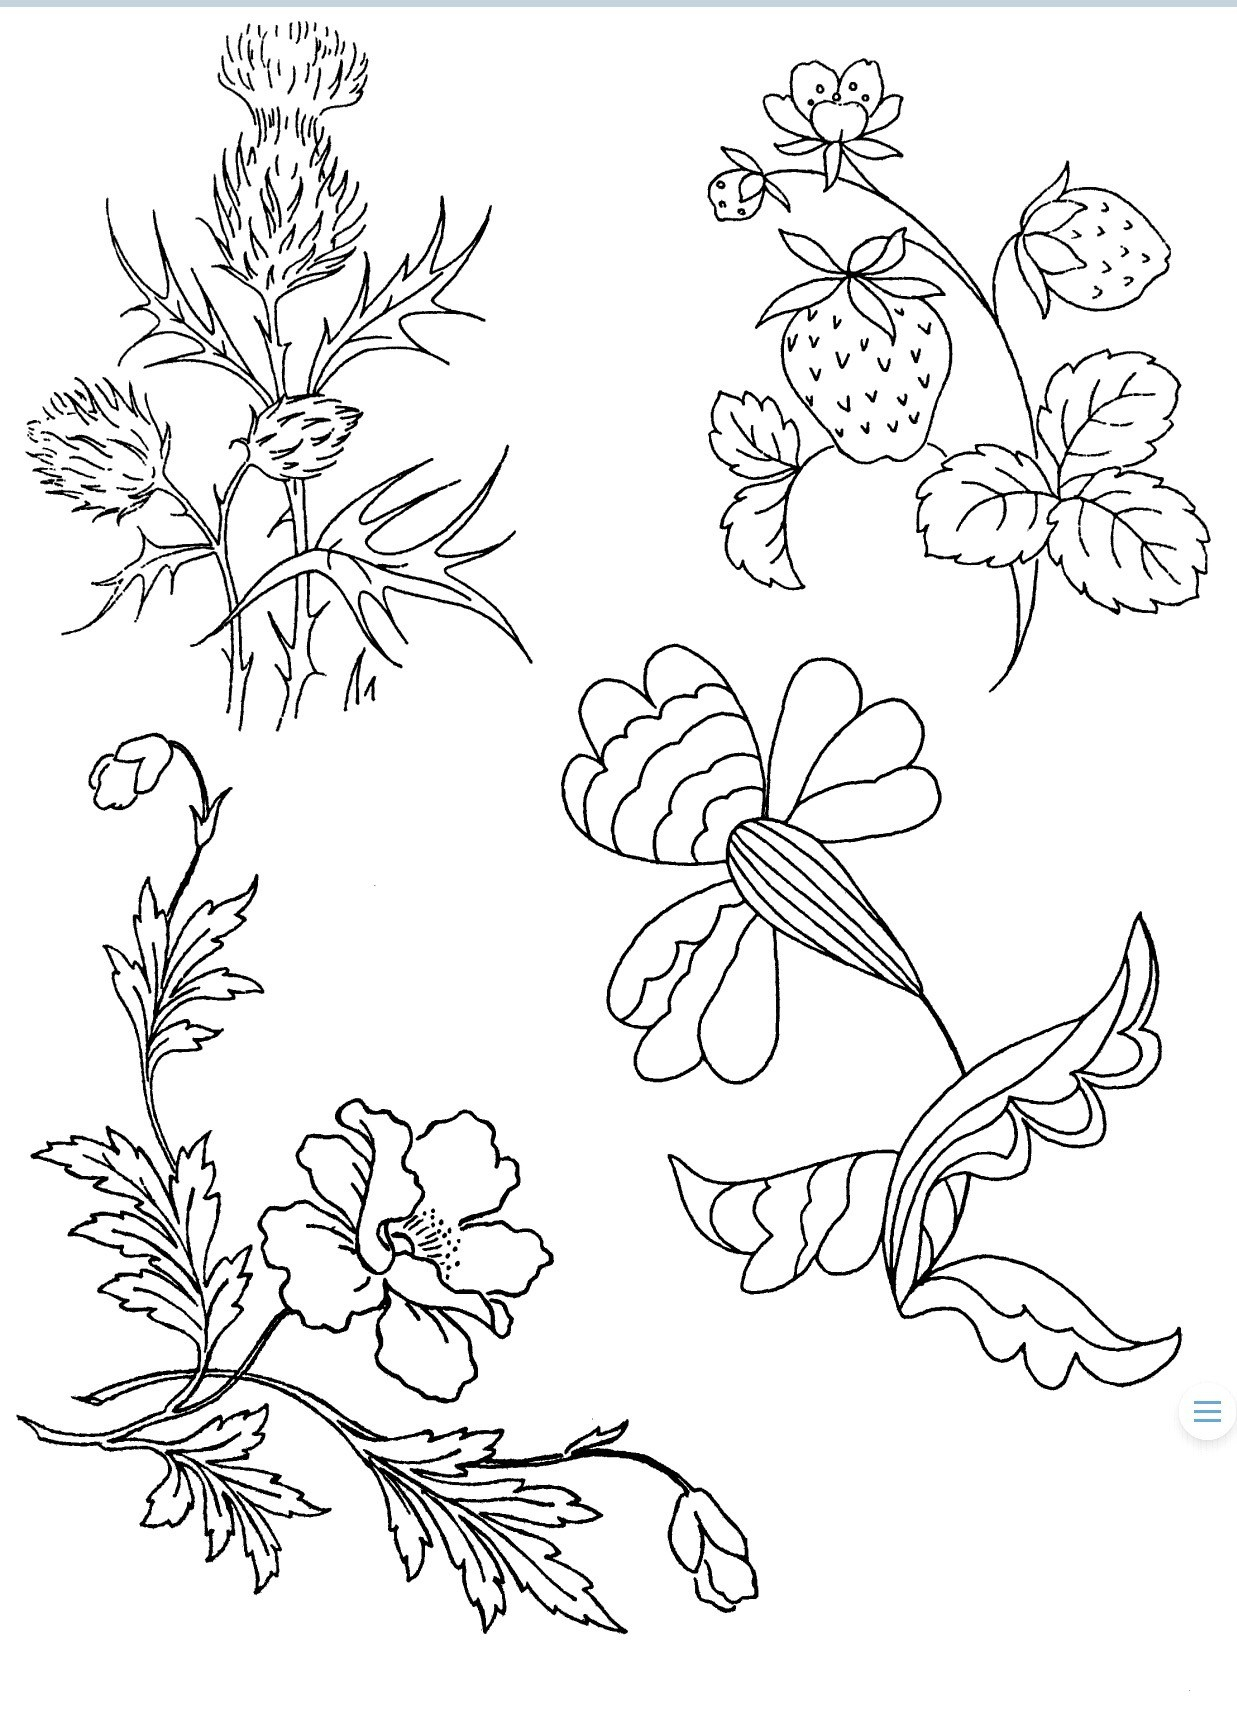 Free Vintage Embroidery Patterns Embroidery Patterns Free Pdf Lots Of Patterns